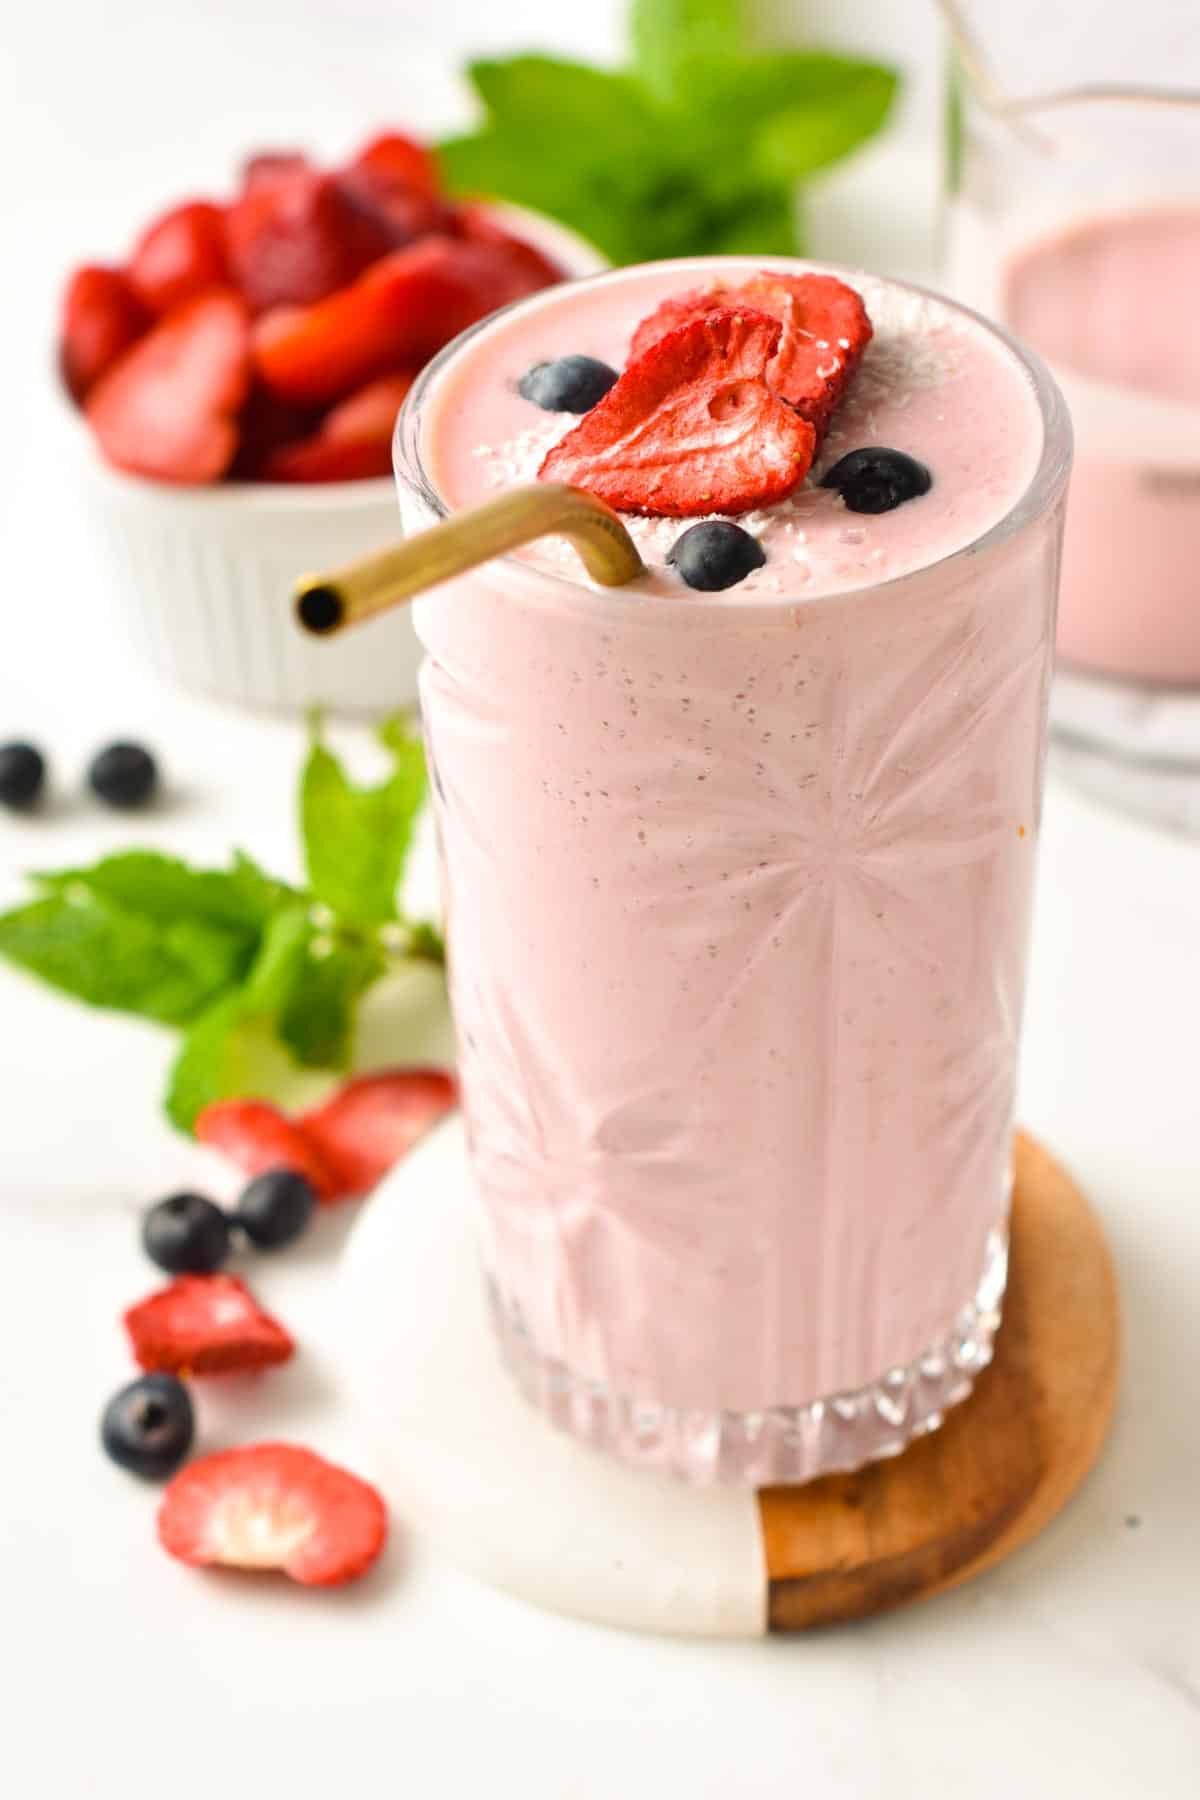 This Cottage Cheese Smoothie is a deliciously thick and creamy high-protein strawberry smoothie made from cottage cheese. With 14 grams of proteins, this is the perfect post work out snack. 